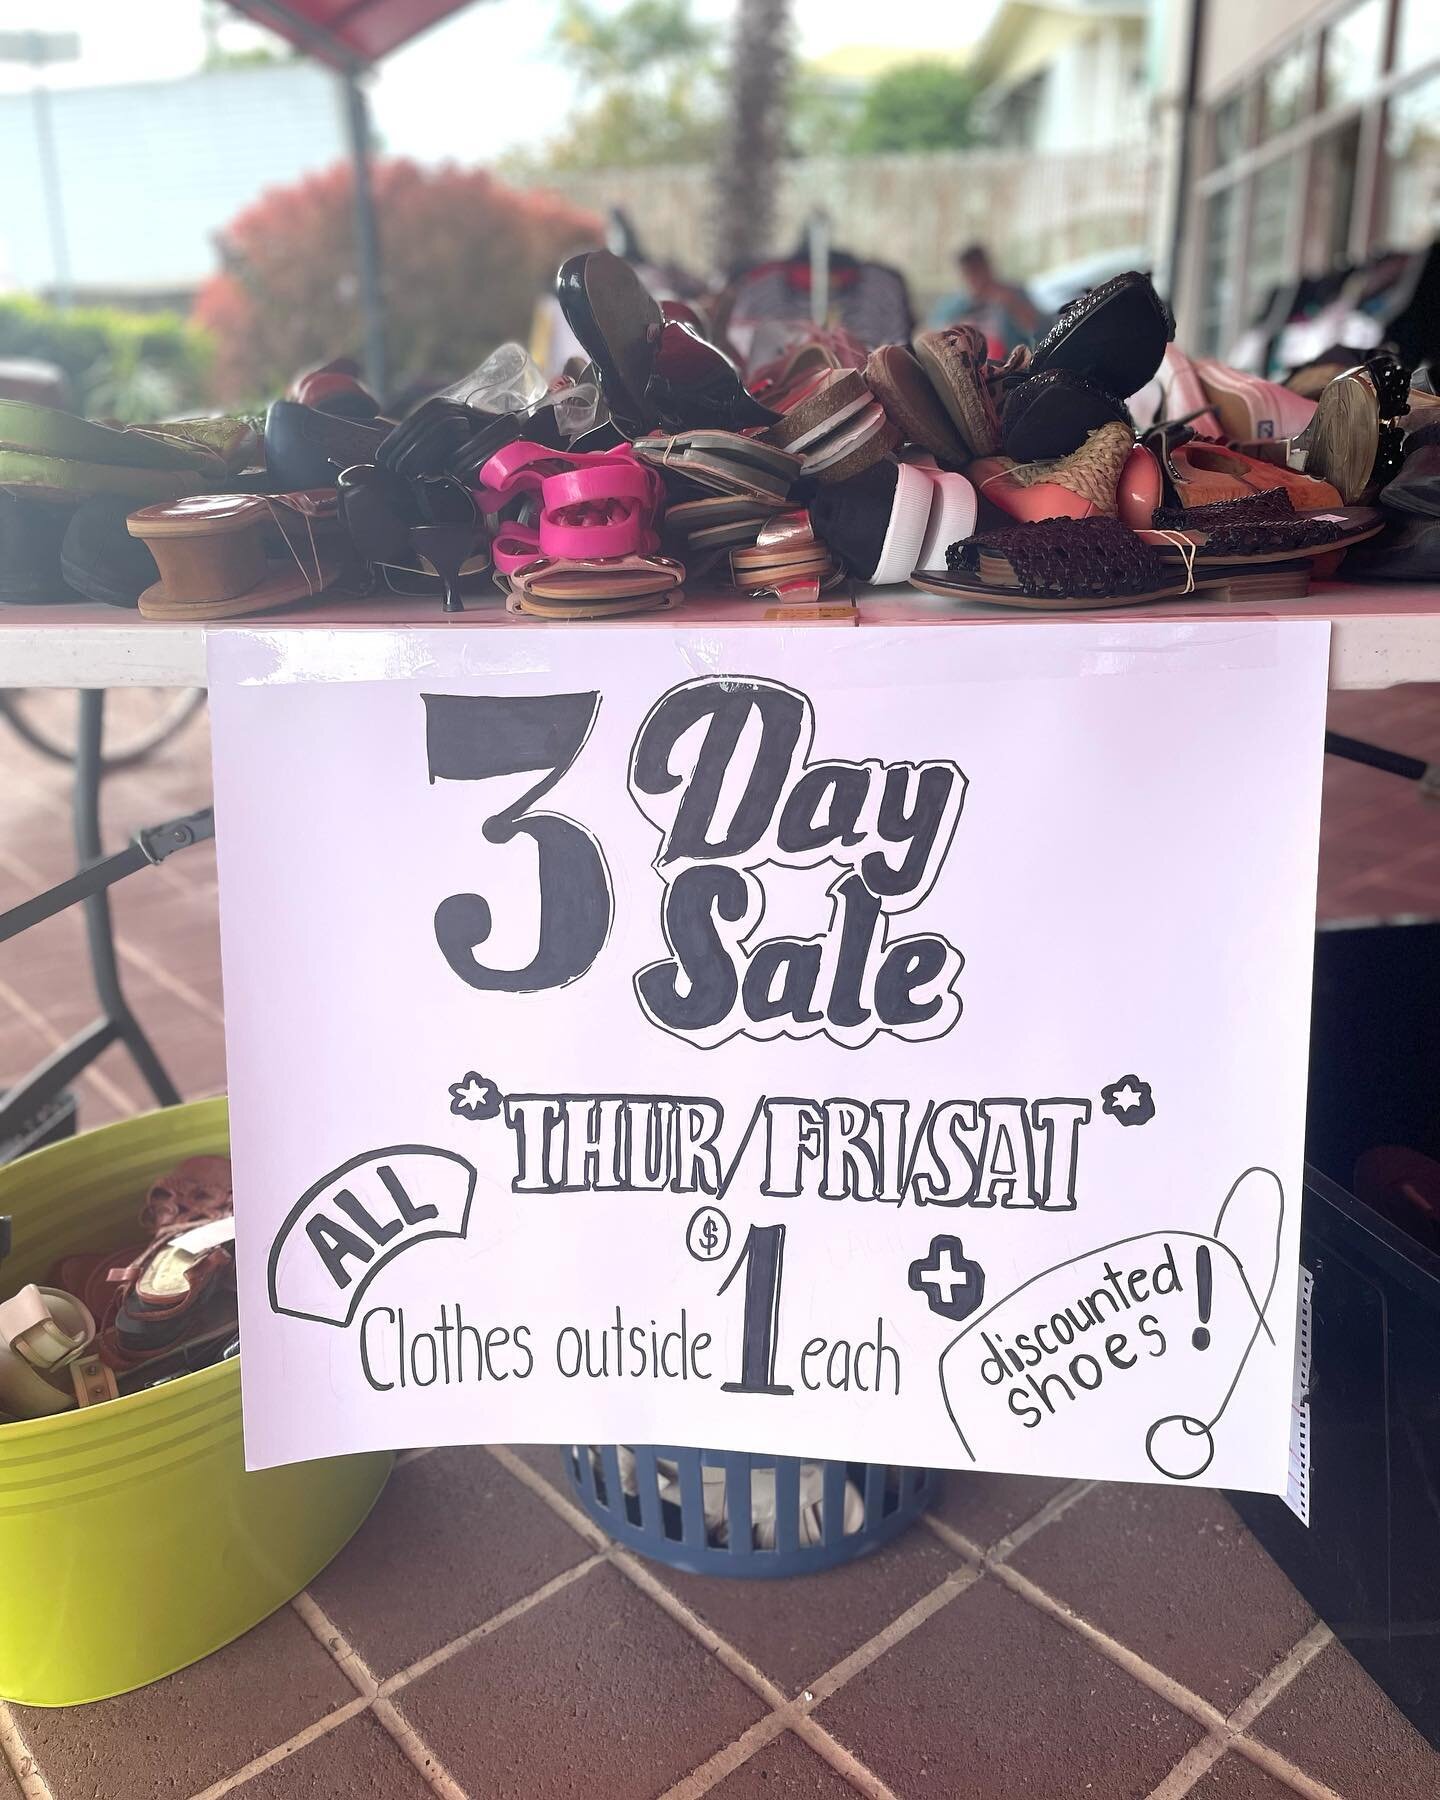 Today is the first day of our 3 Day Sale! 🥳

For the next three days all clothing on our outside racks are just $1, shoes are heavily discounted ($1-$5) and bundles are half price! ❤️